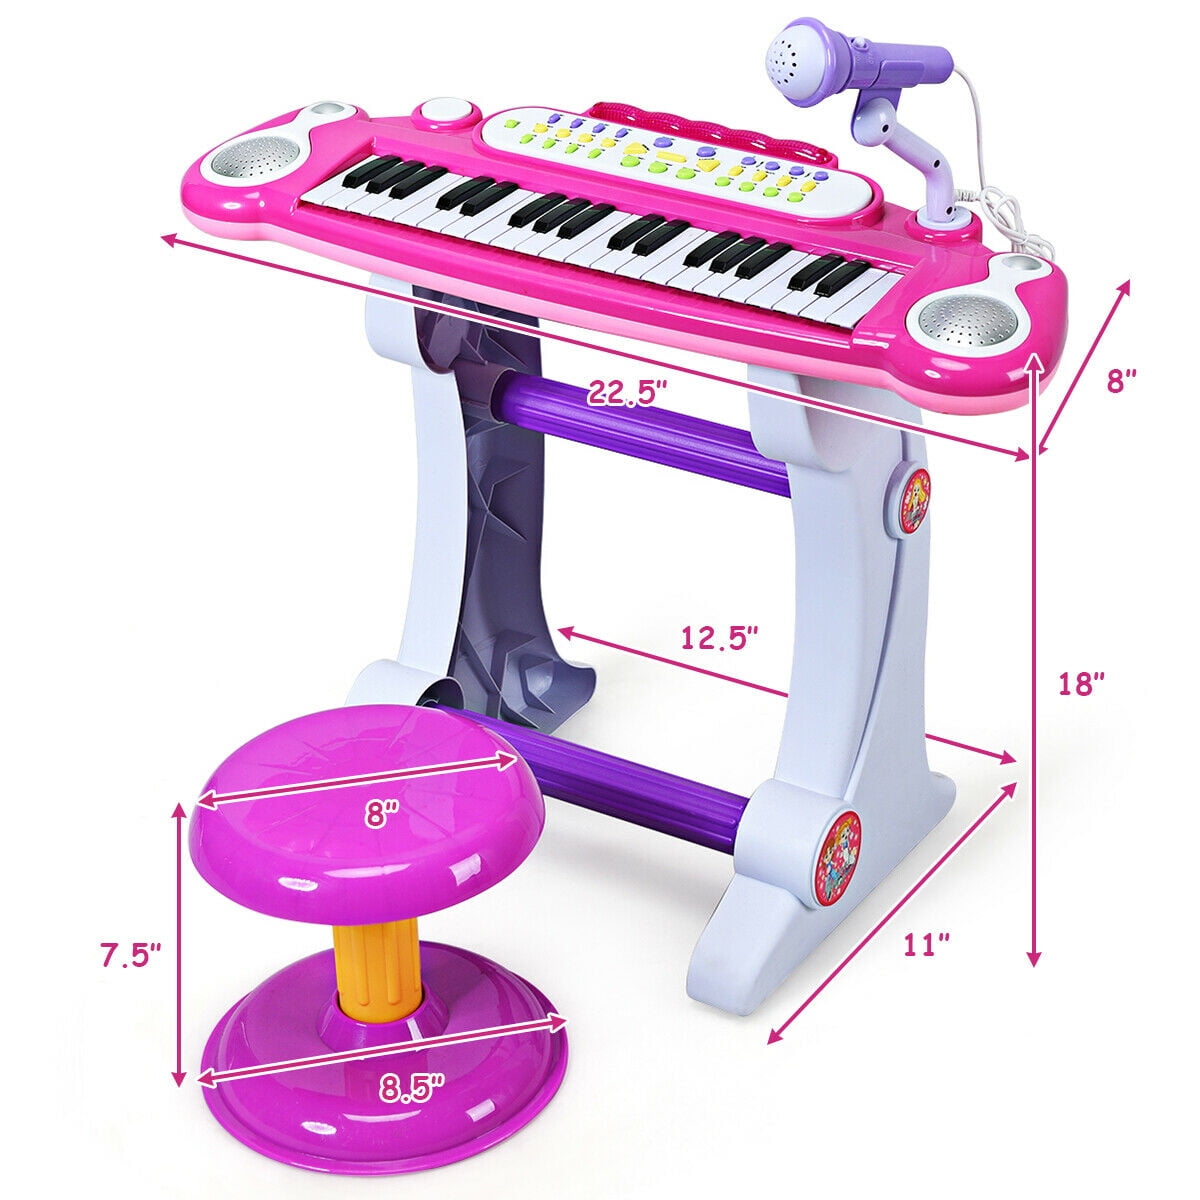 TWFRIC Beginners Piano Keyboard 37 Keys Portable Electronic Keyboard Piano Built-in Rechargeable Battery Kids Piano with Headphone Jack Learning Musical Instruments Gift for Boys Girls 